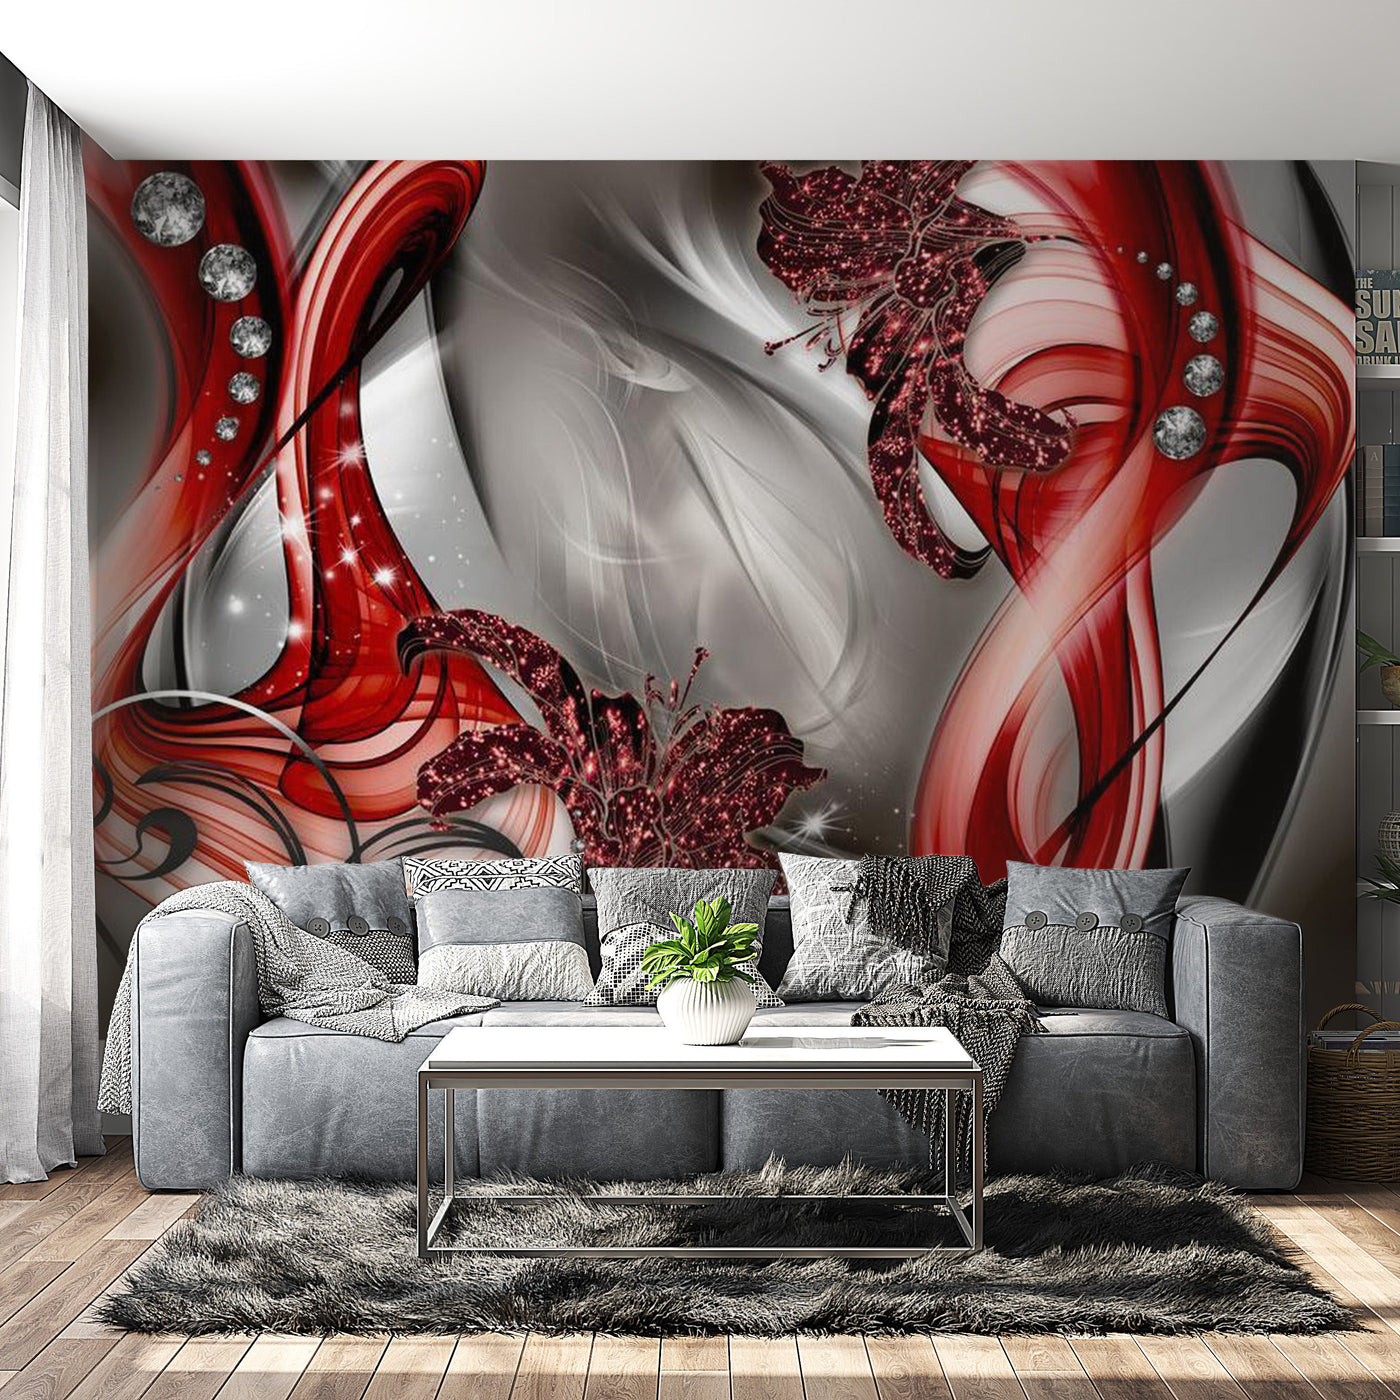 Vivyet Peel and Stick Wall Mural - Music of Love 57.9x41.3